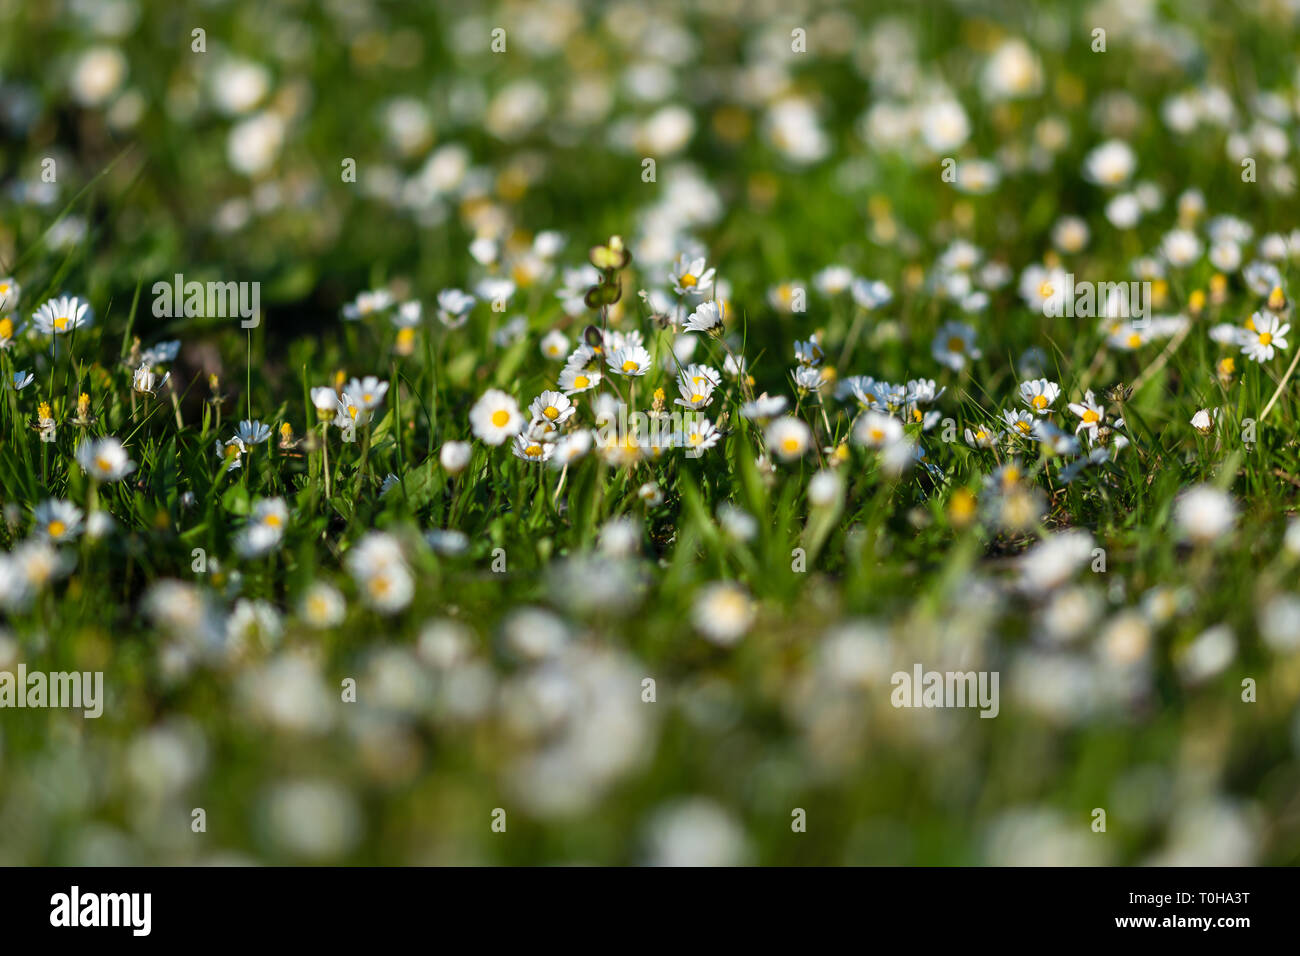 natural small Daisy blooms on grass field with lens blur effect. suitable for nature, outdoor and flower themes. Stock Photo